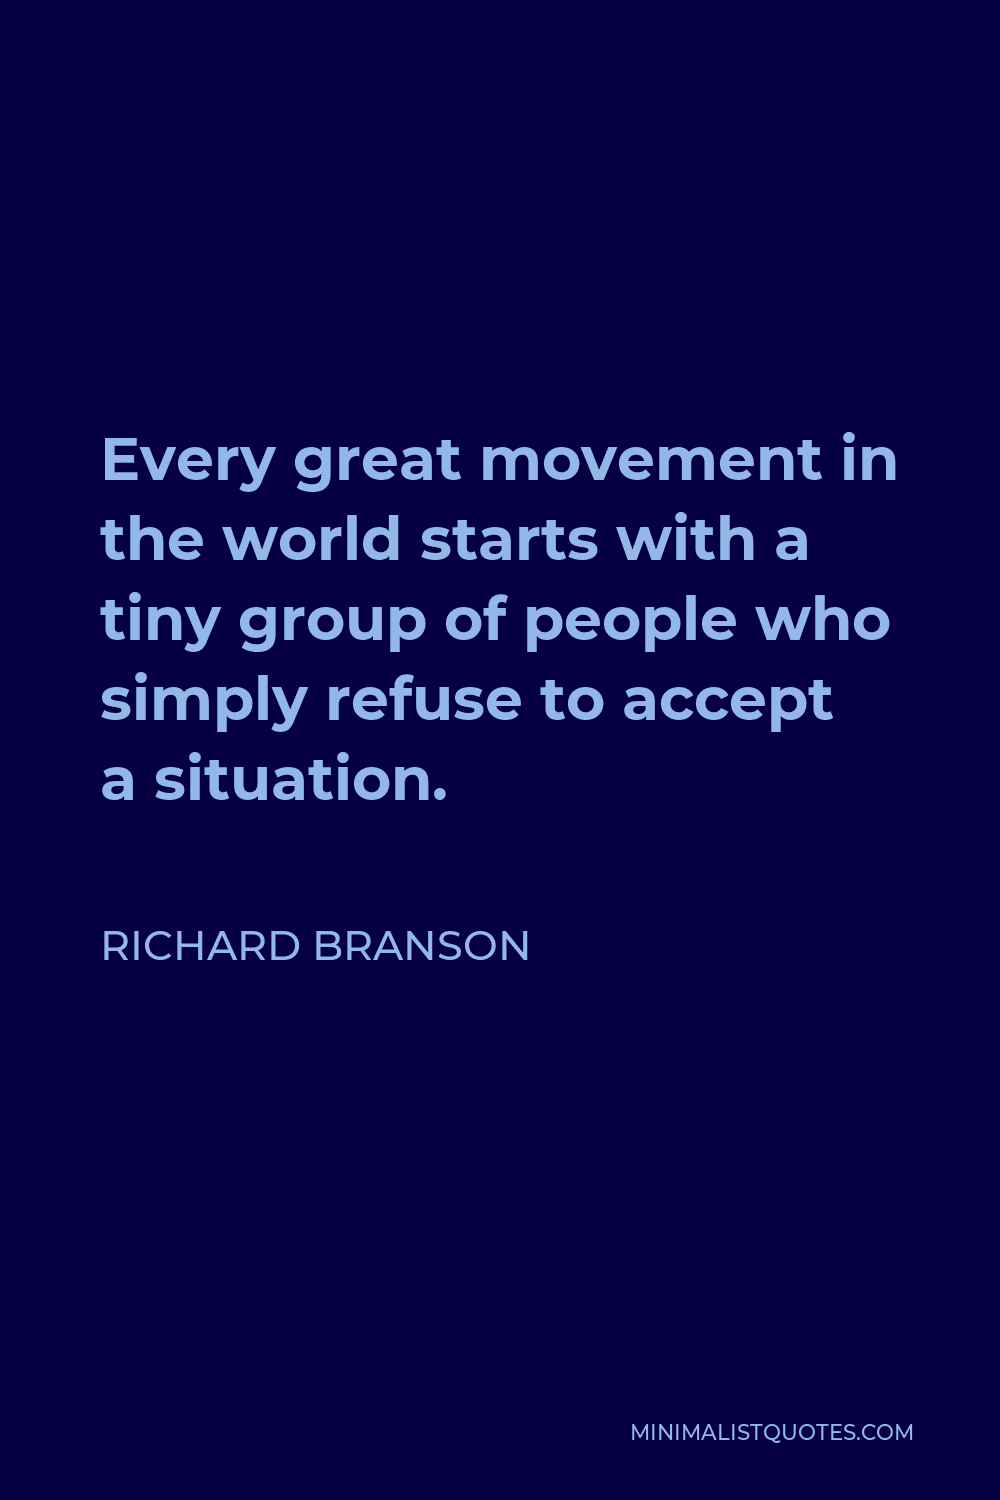 Richard Branson Quote - Every great movement in the world starts with a tiny group of people who simply refuse to accept a situation.